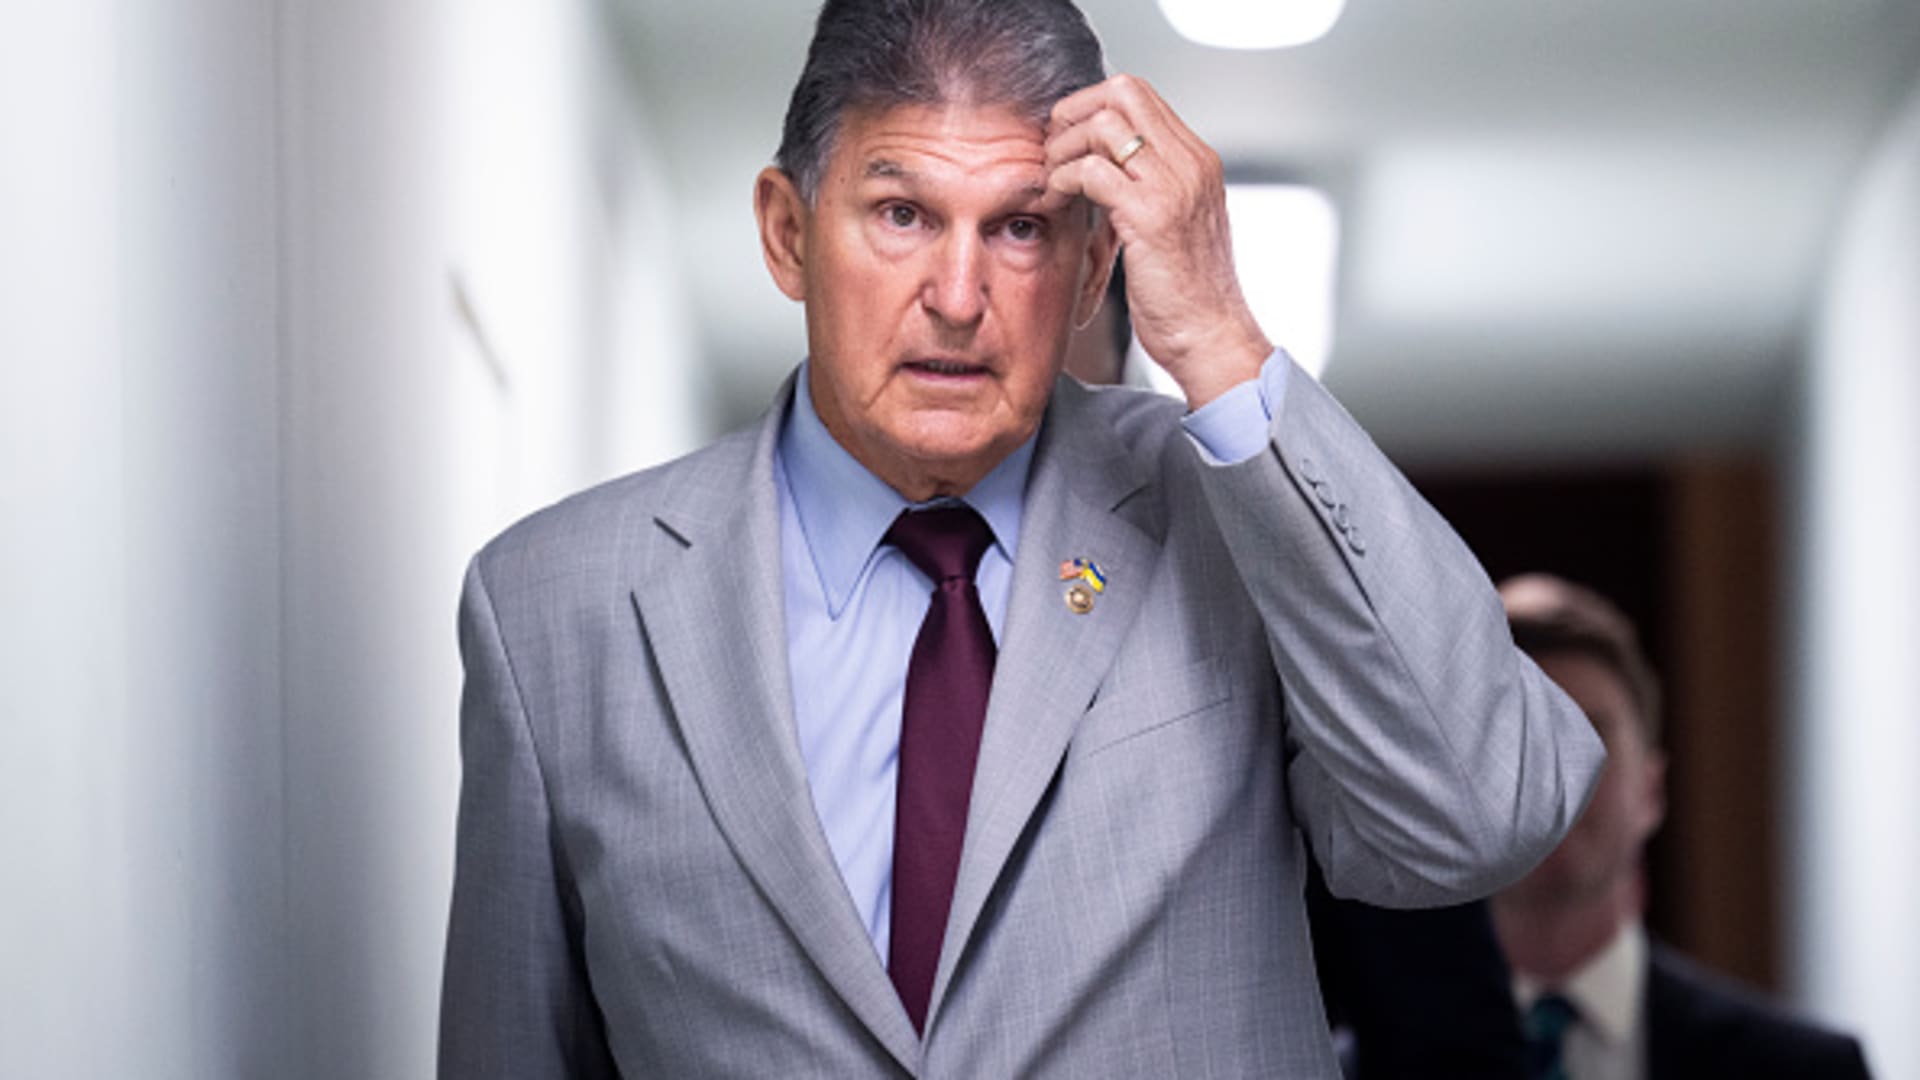 Manchin touts inflation reduction bill, says ‘I’m not getting involved’ in upcoming elections